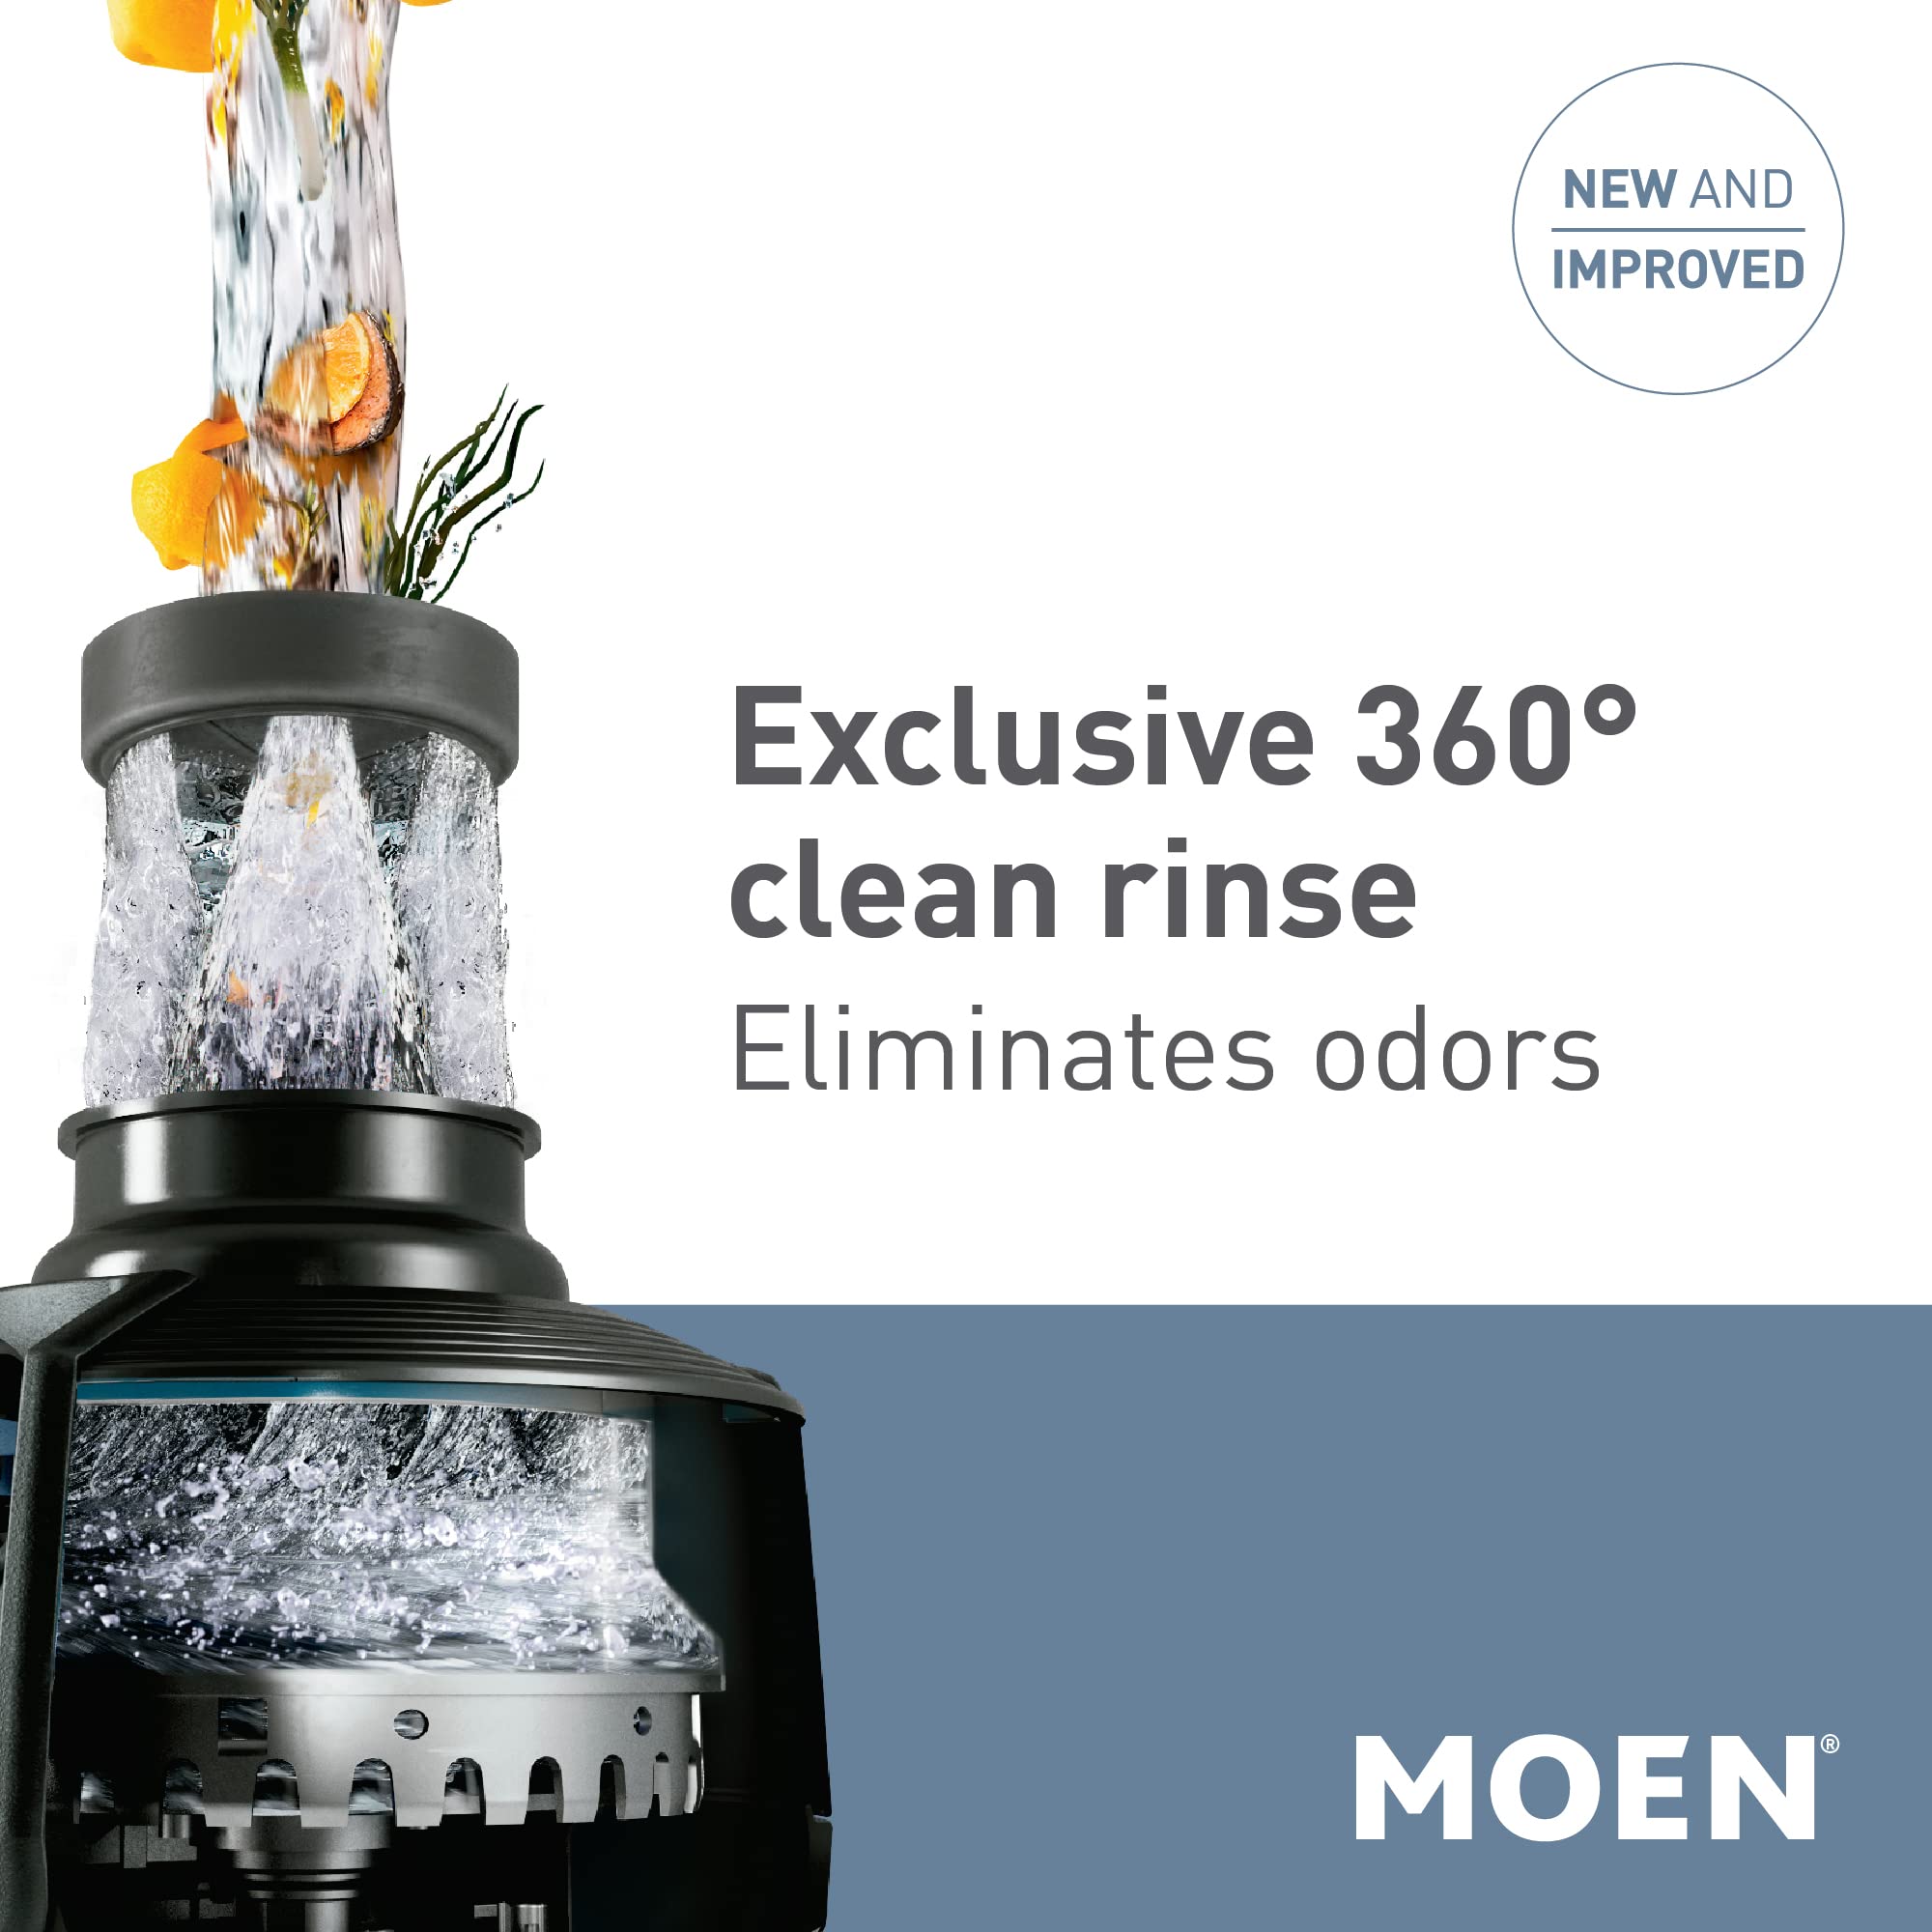 Moen Prep Series PRO 1/2 HP Continuous Feed Compact Garbage Disposal, Power Cord Included, GXP50C